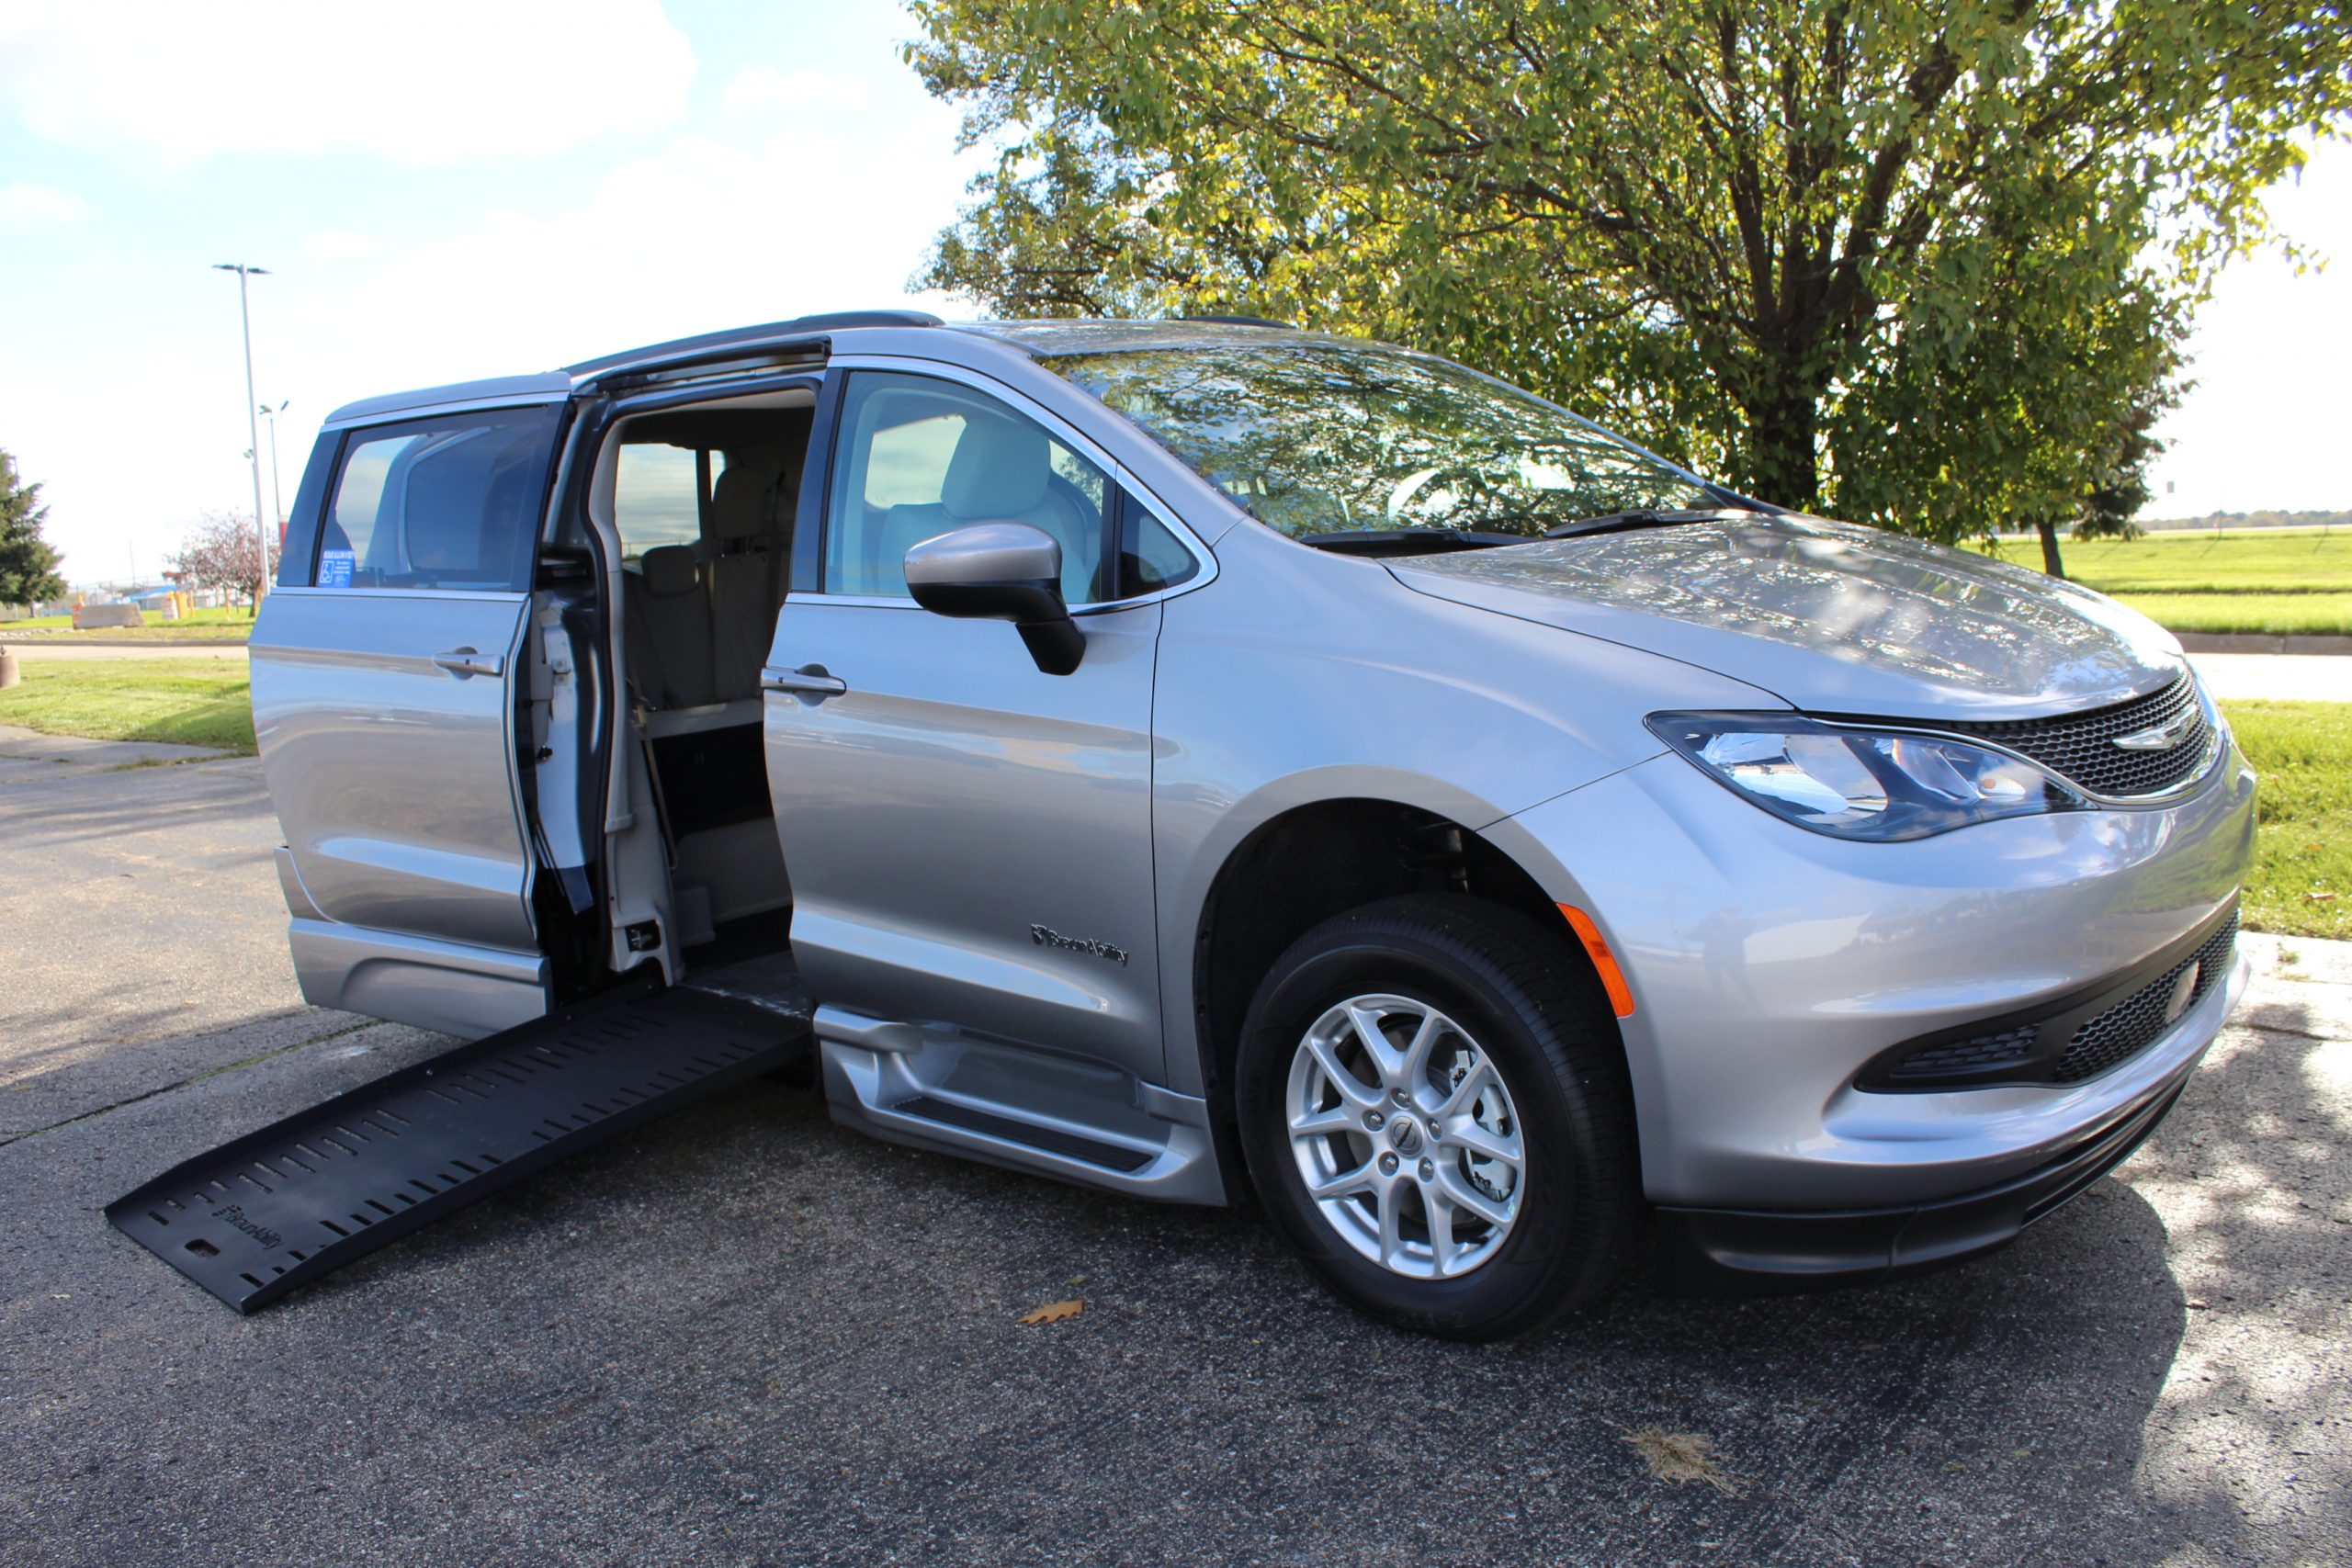 2021 Billet Silver Chrysler Voyager LXI with BraunAbility XT Conversion